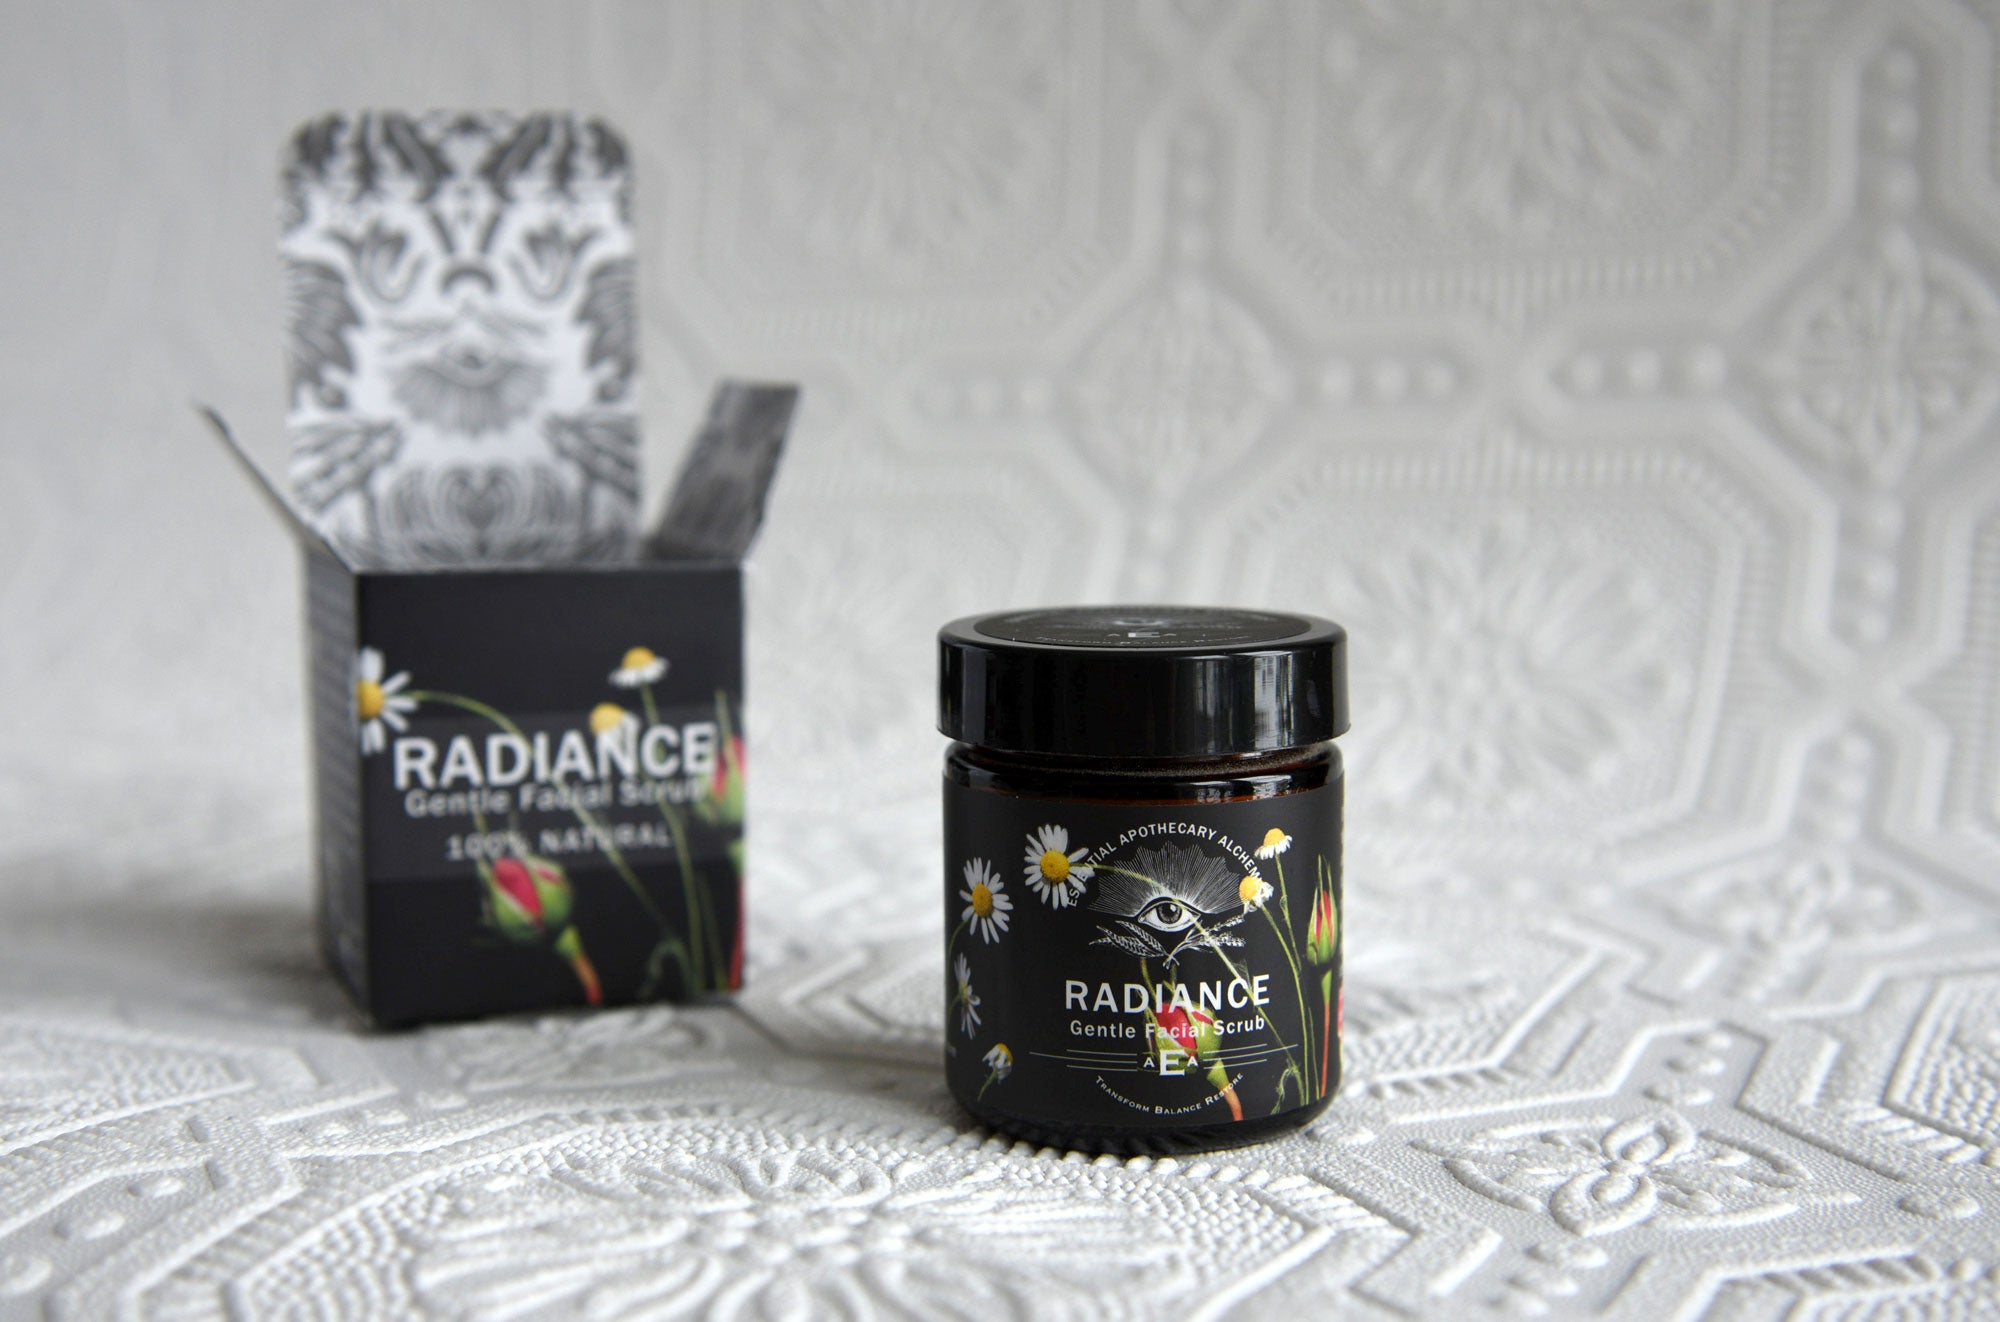 Radiance facial scrub packaging and box